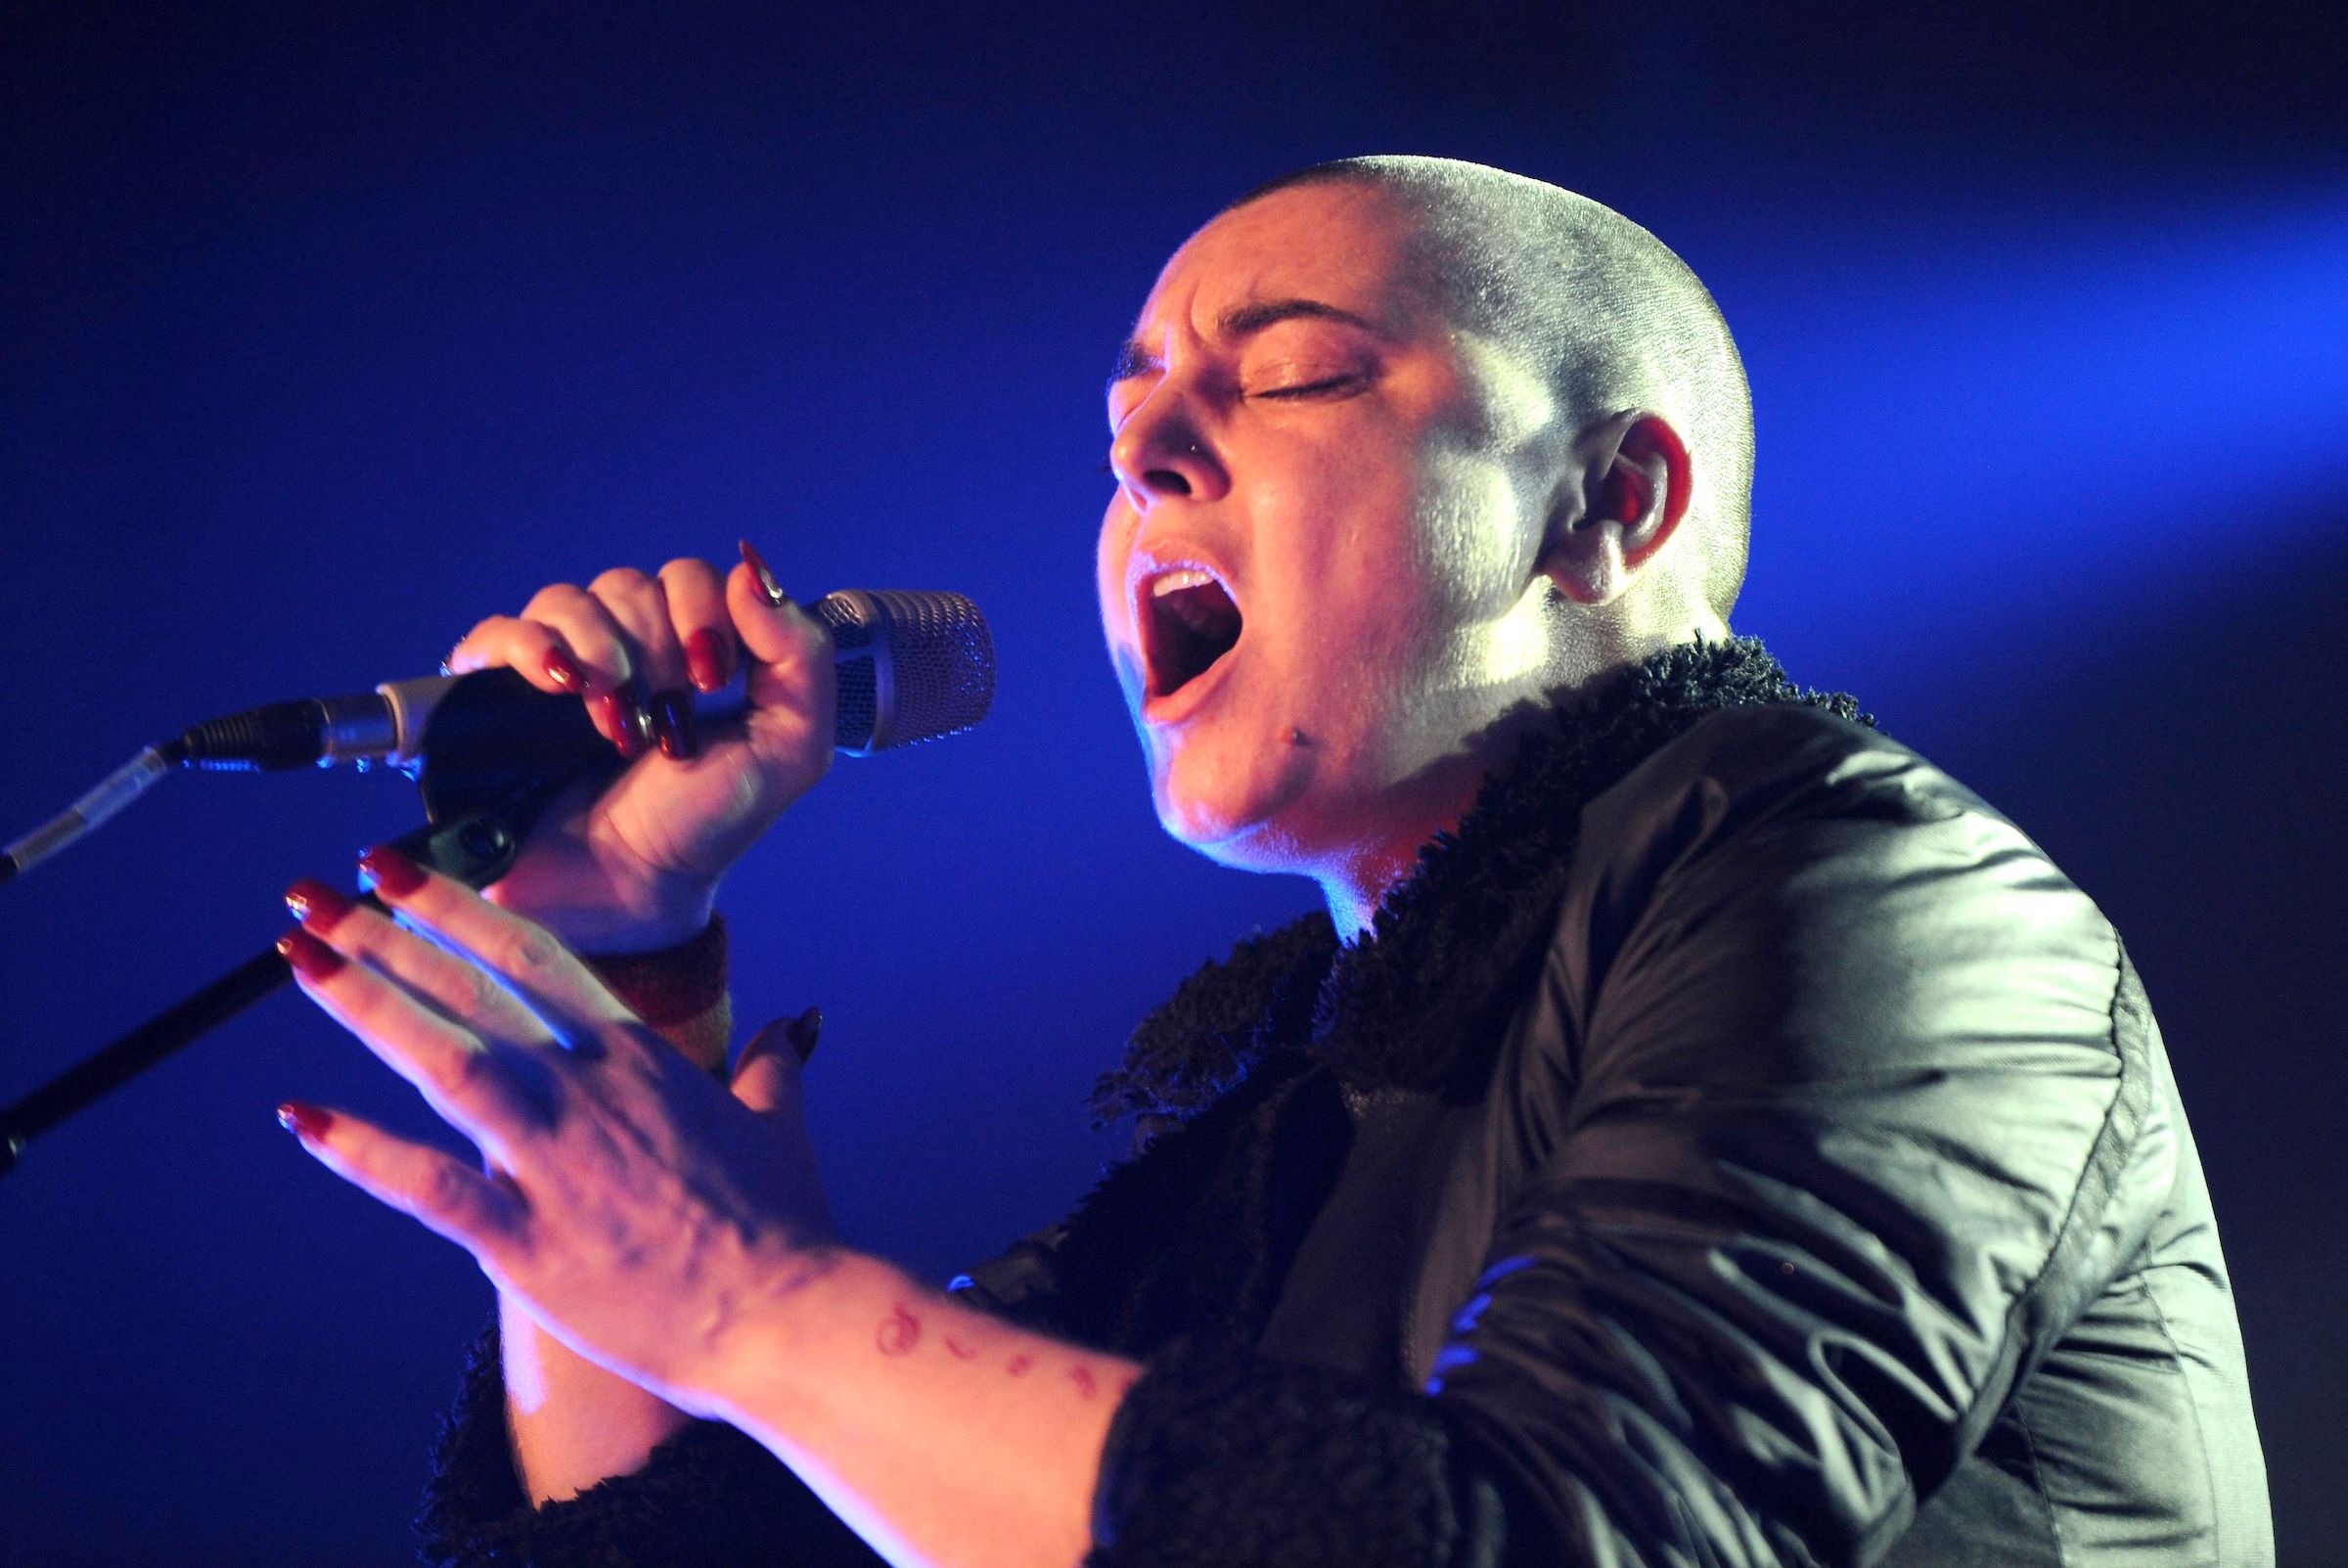 Sinéad O'Connor, who rose to fame thanks to Prince's song 'Nothing Compares 2 U', singing on stage